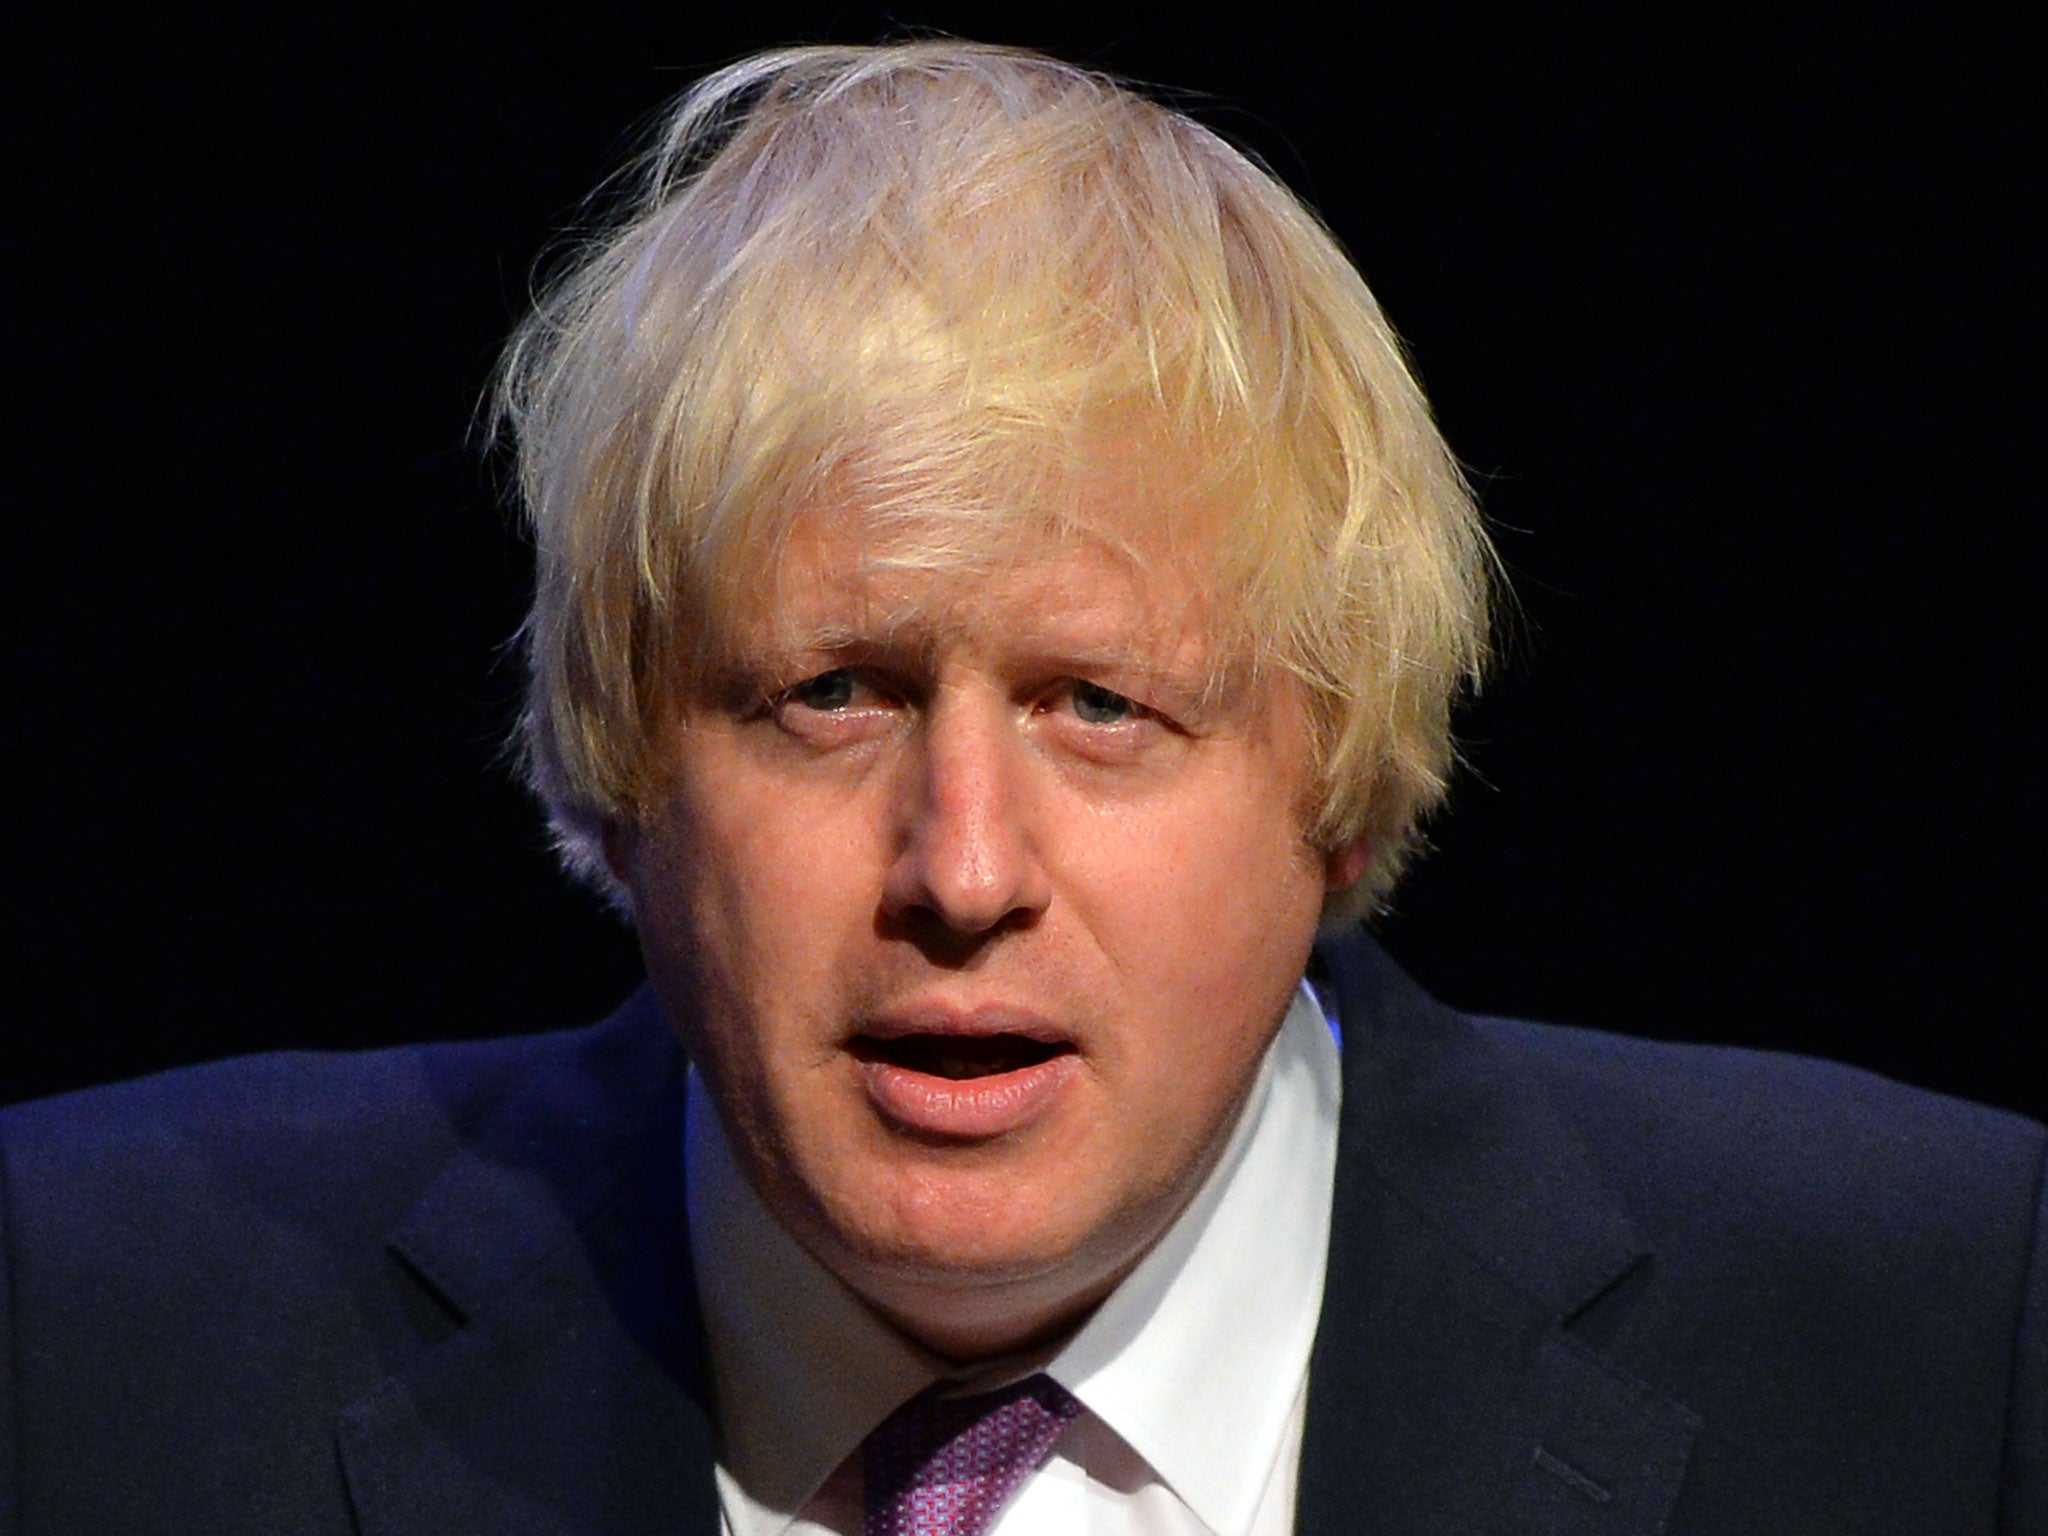 London Mayor Boris Johnson said Britain had been gripped by a 'fatal squeamishness' when dealing with certain social, religious and cultural groups